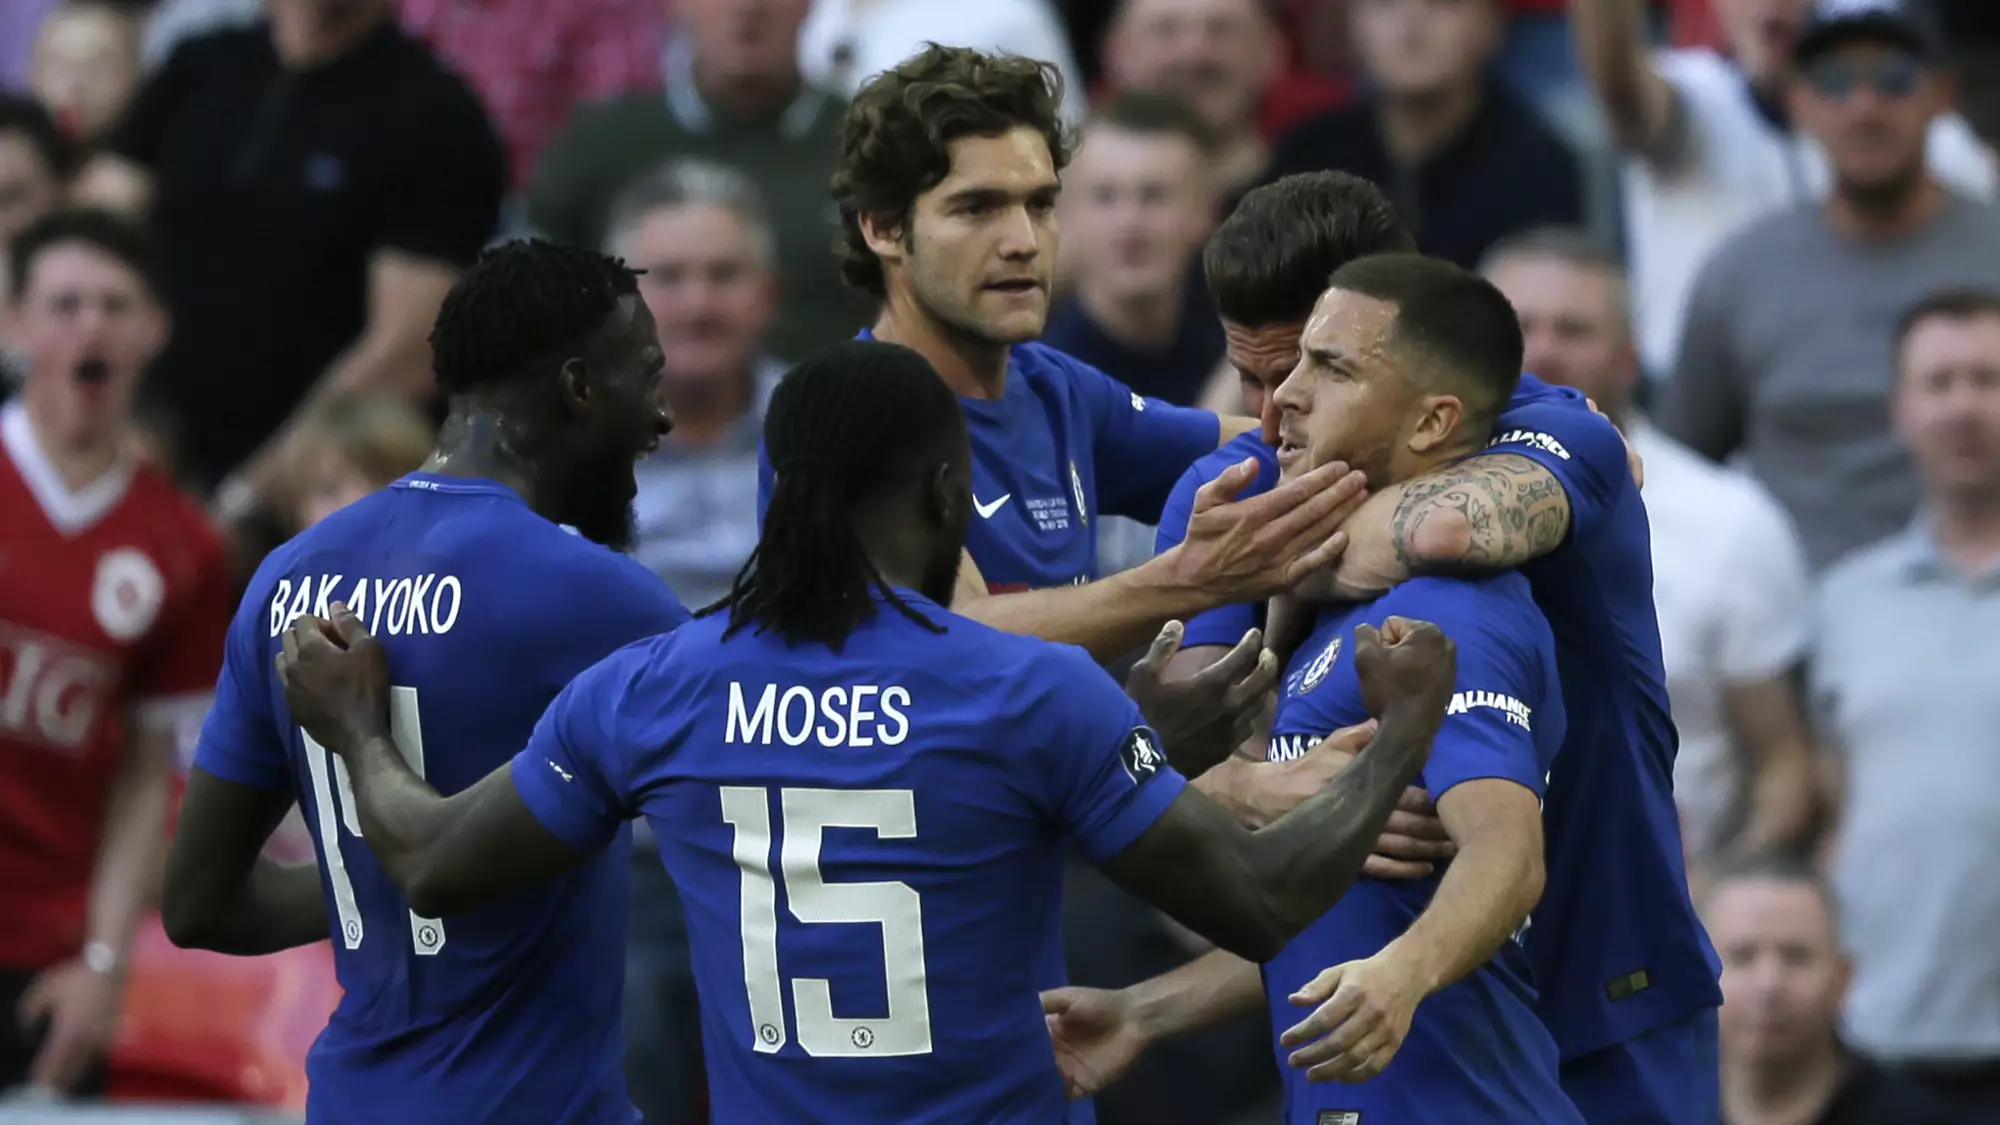 Chelsea Win The FA Cup Following 1-0 Win Over Manchester United